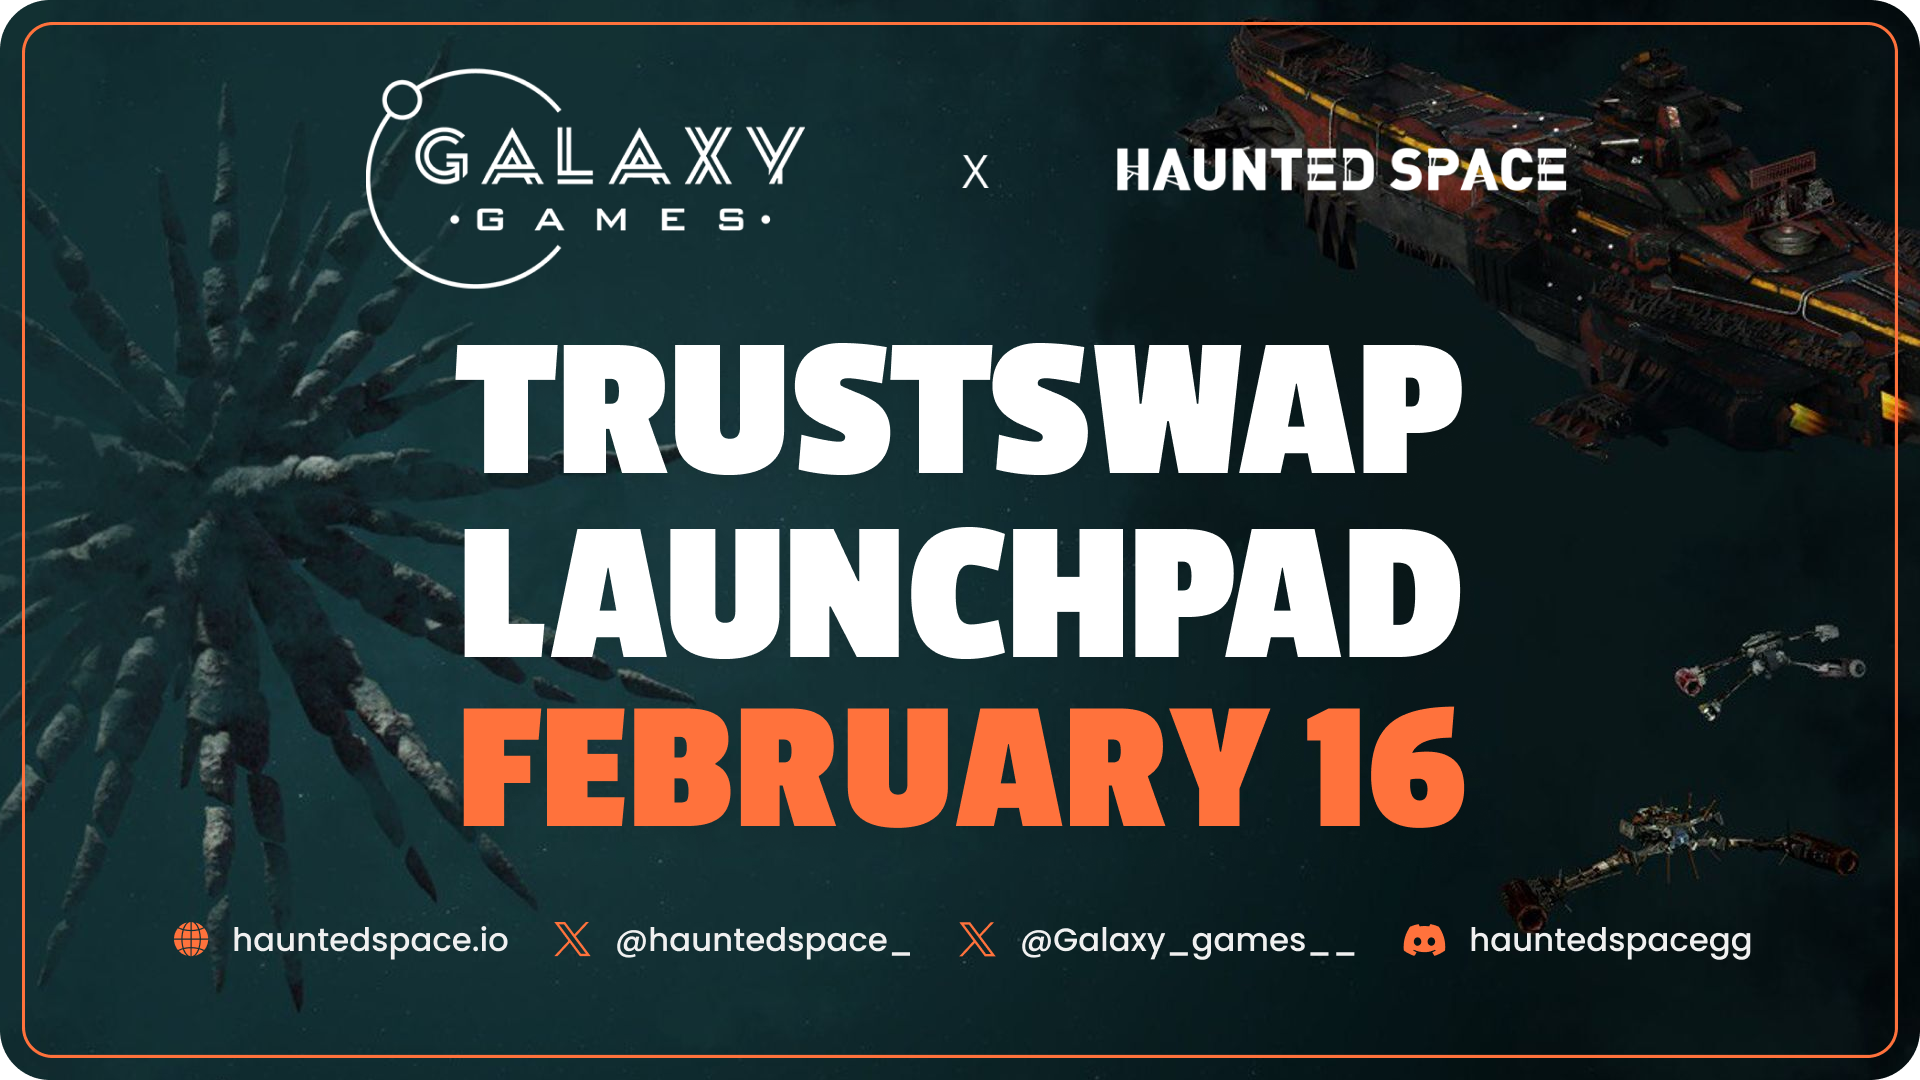 Galaxy Games Announces Private Round Token Offering February 16th On TrustSwap Launchpad